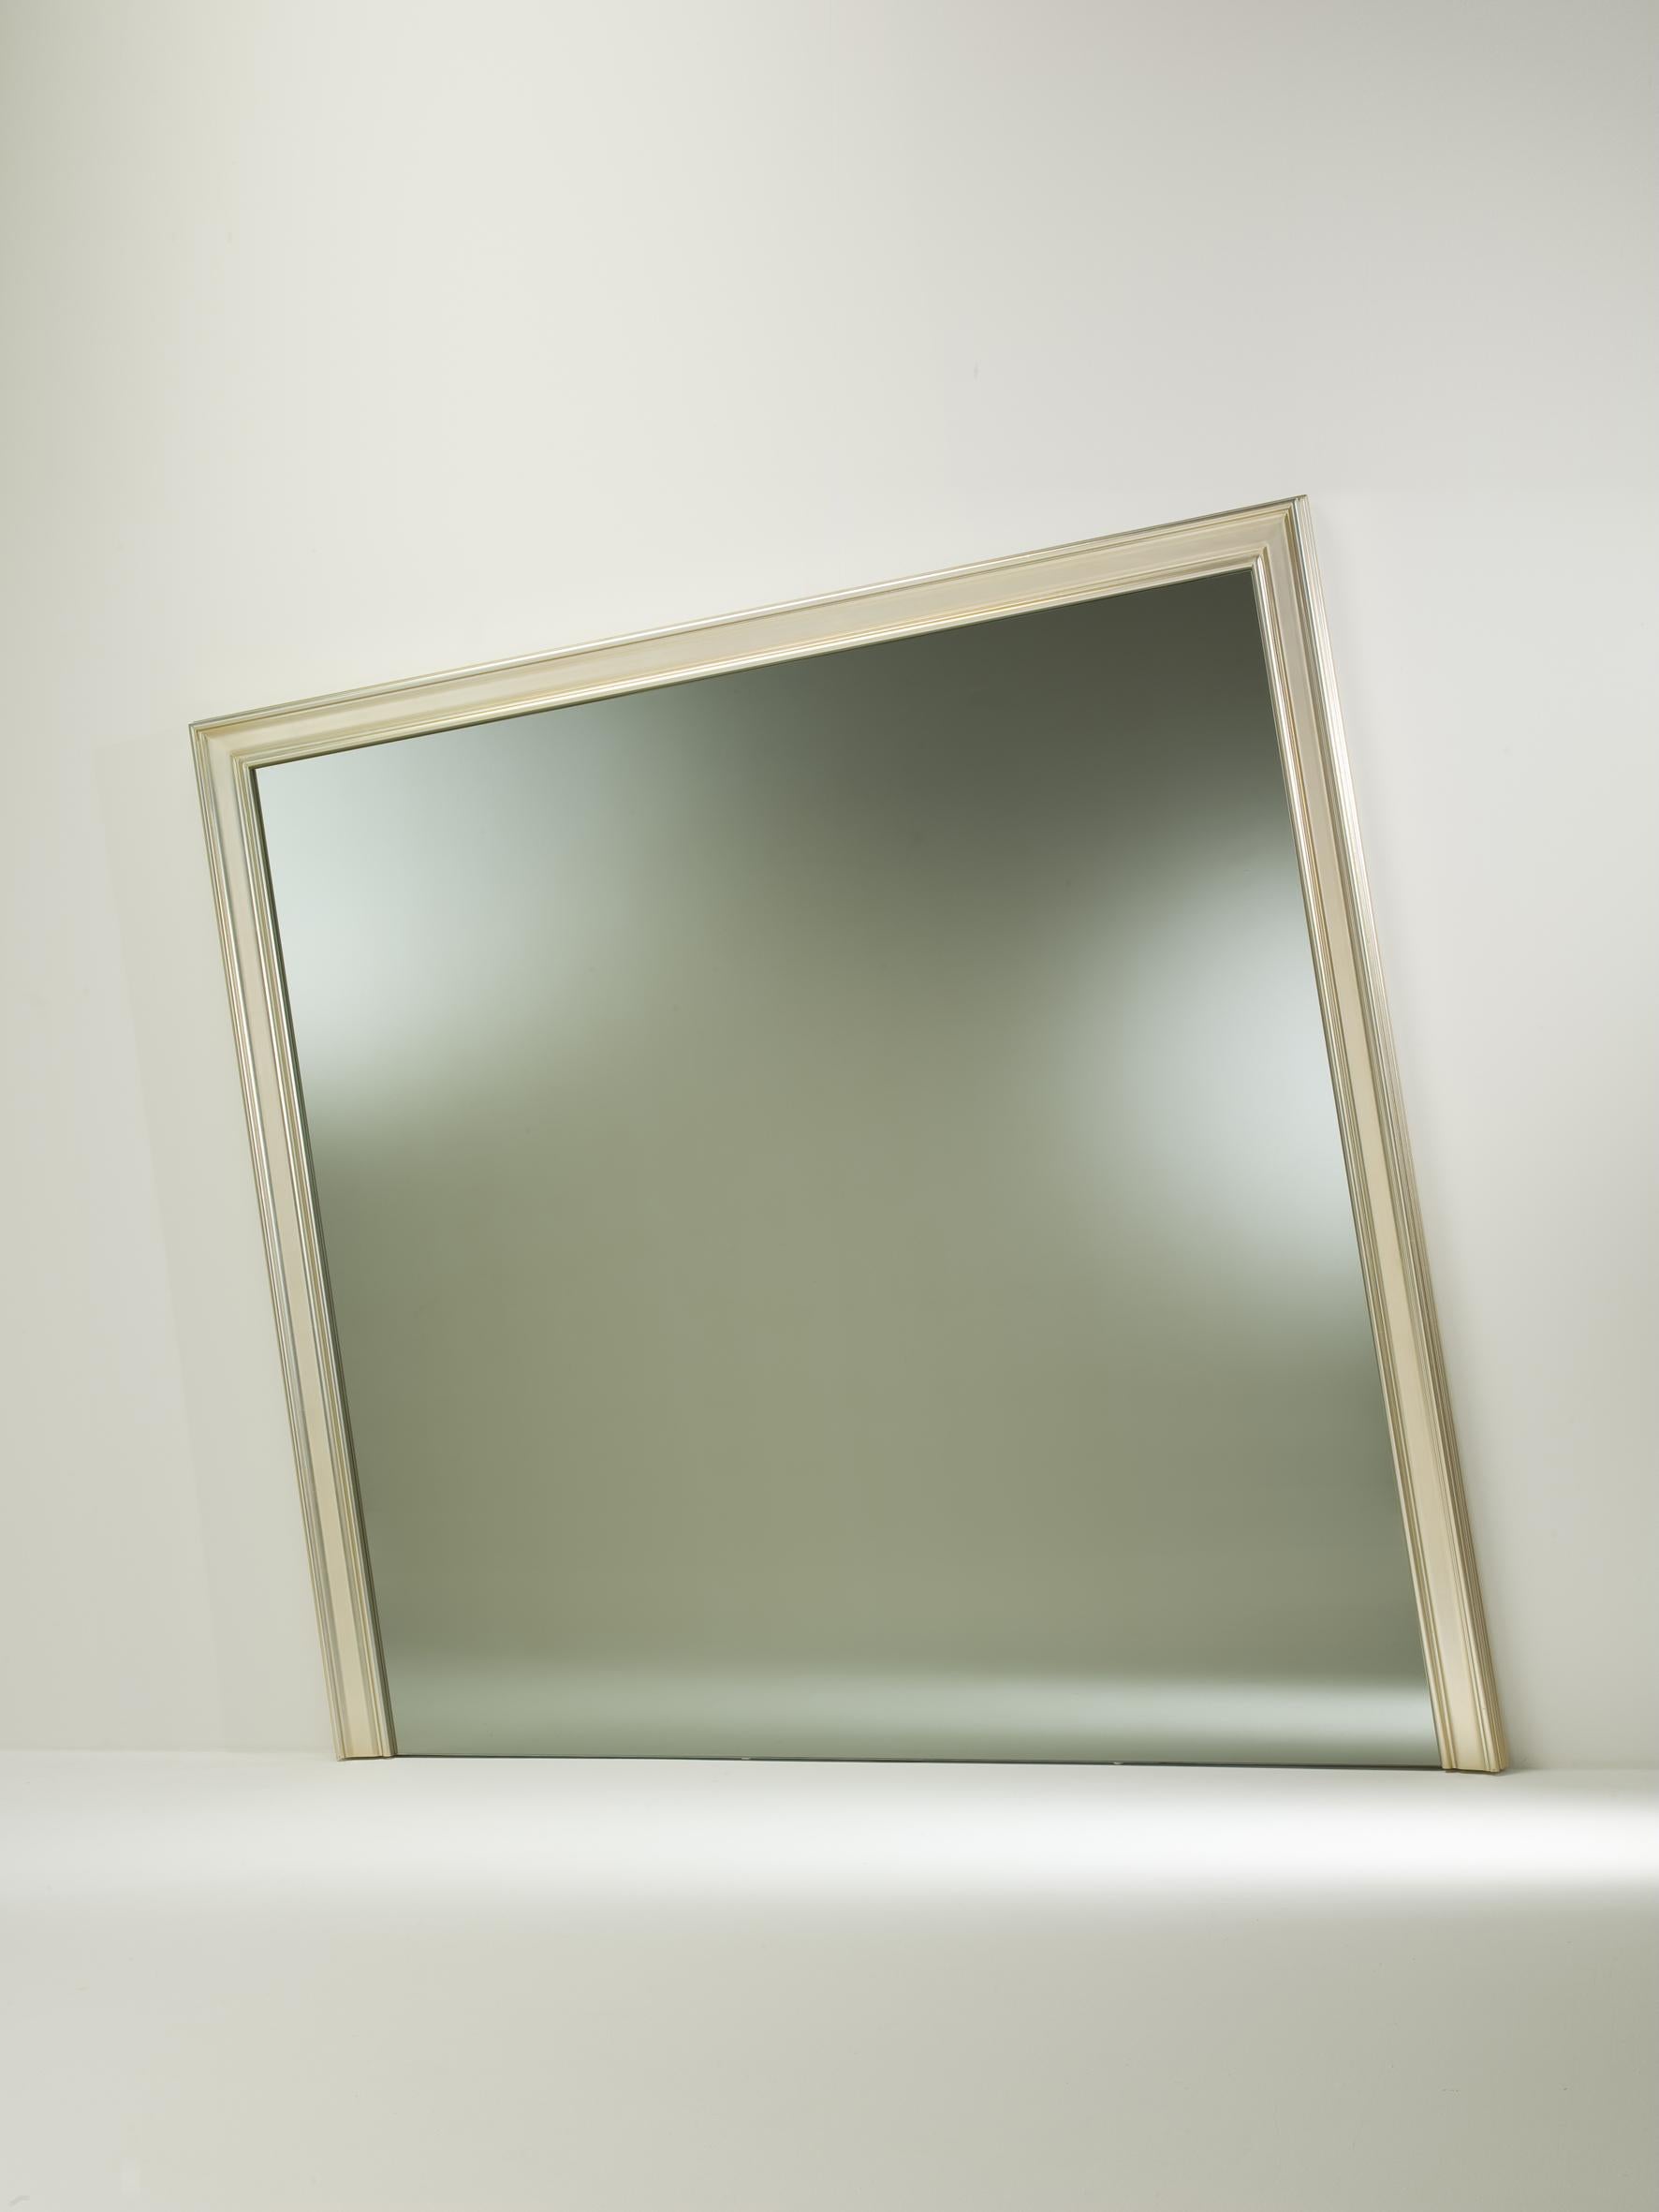 Step into the realm of illusion with the Decadence Mirror by Studio R2d—a captivating play of design that defies gravity with its alluring oblique lines. Crafted to challenge perceptions, this mirror is more than just a reflection; it's an artistic